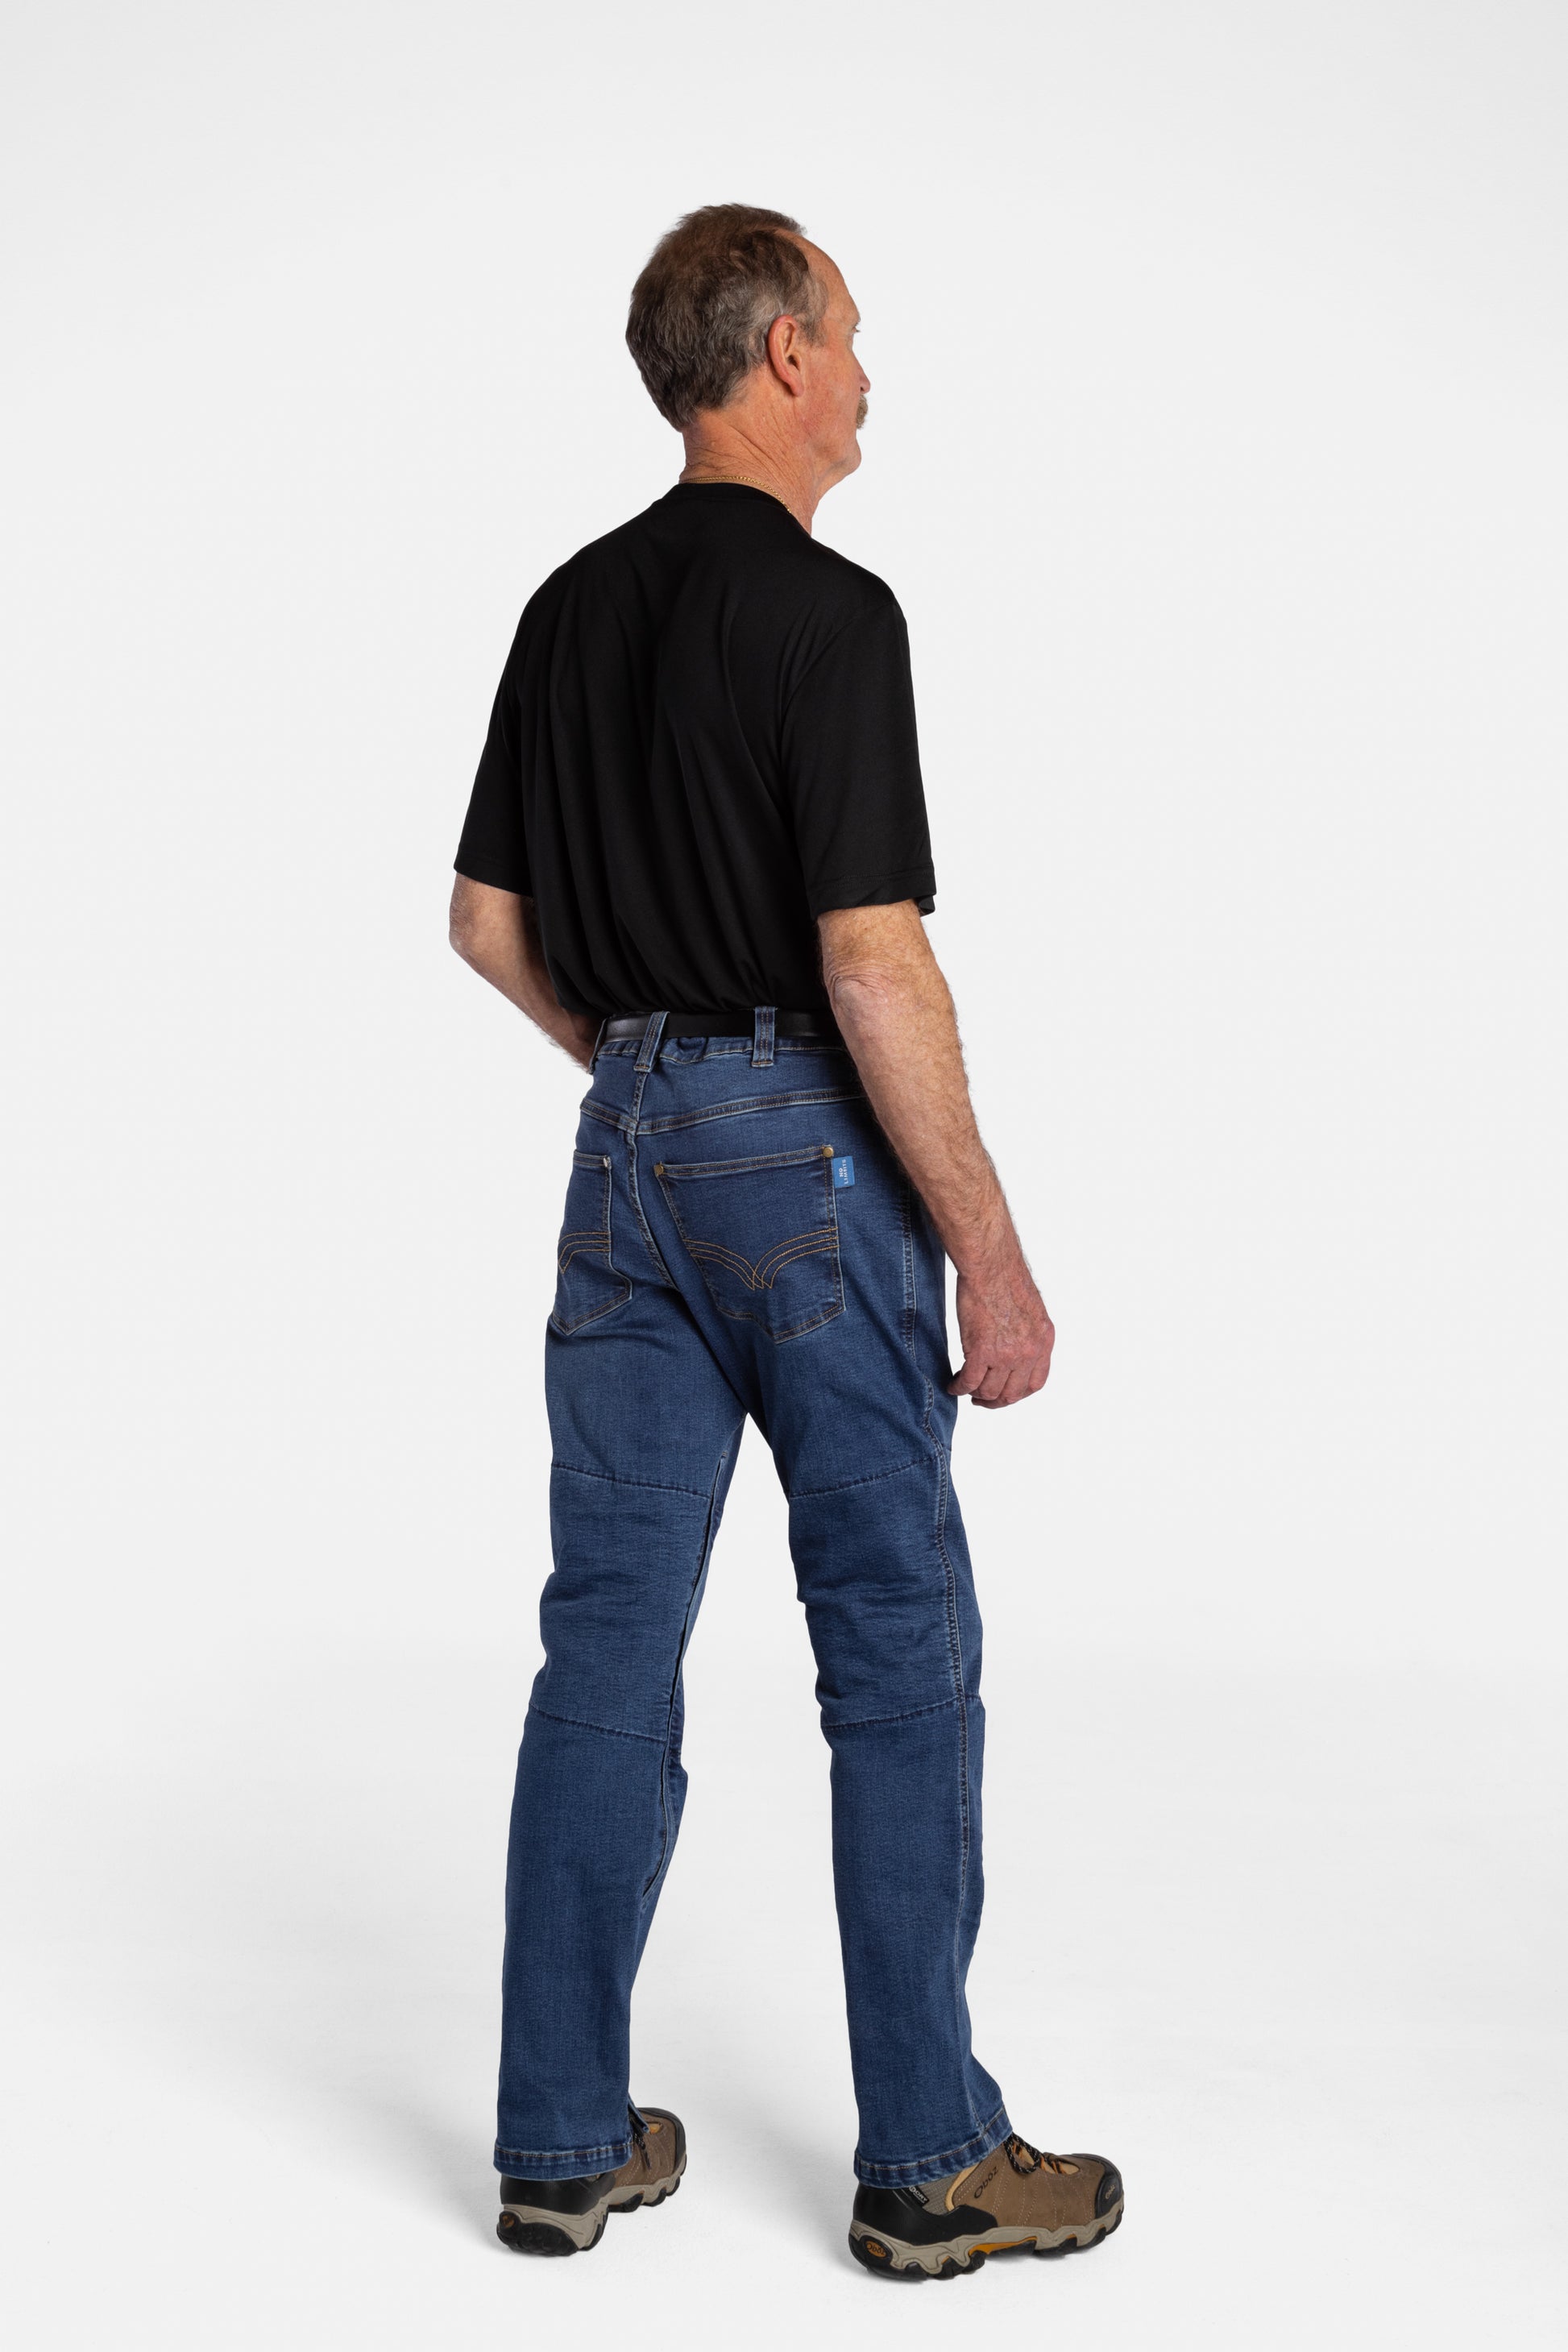 The back of a white, elderly man with a mustache wearing the No Limbits Adaptive Men's Dark Wash Unlimbited Pants (which looks like denim jeans), with a black shirt, a brown belt, and brown shoes.